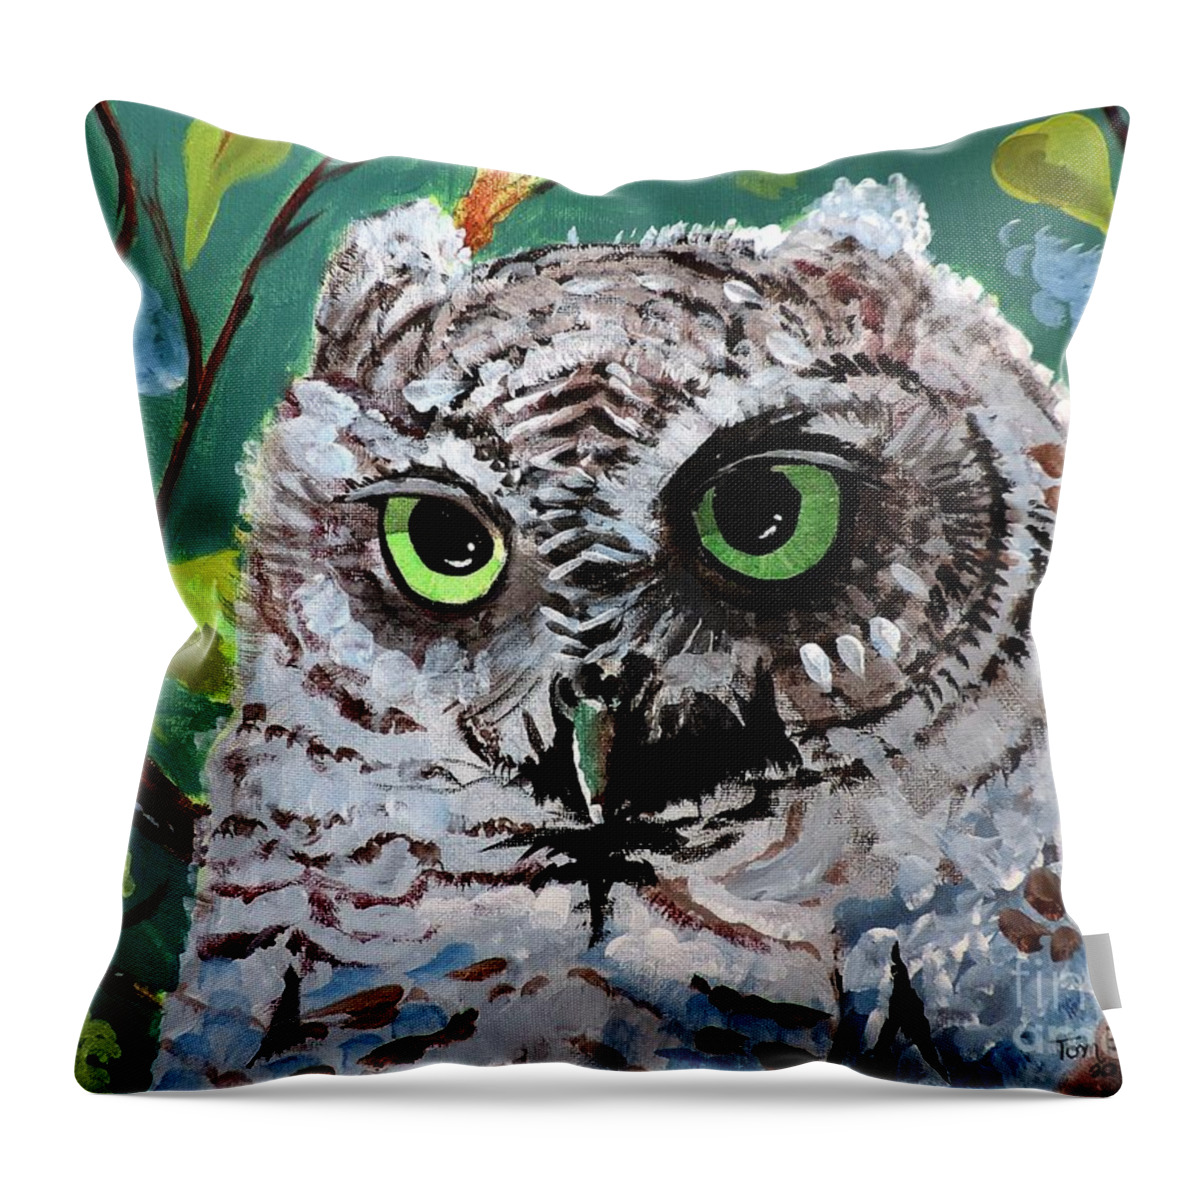 Baby Owl Throw Pillow featuring the painting Owl Be Seeing You by Tom Riggs